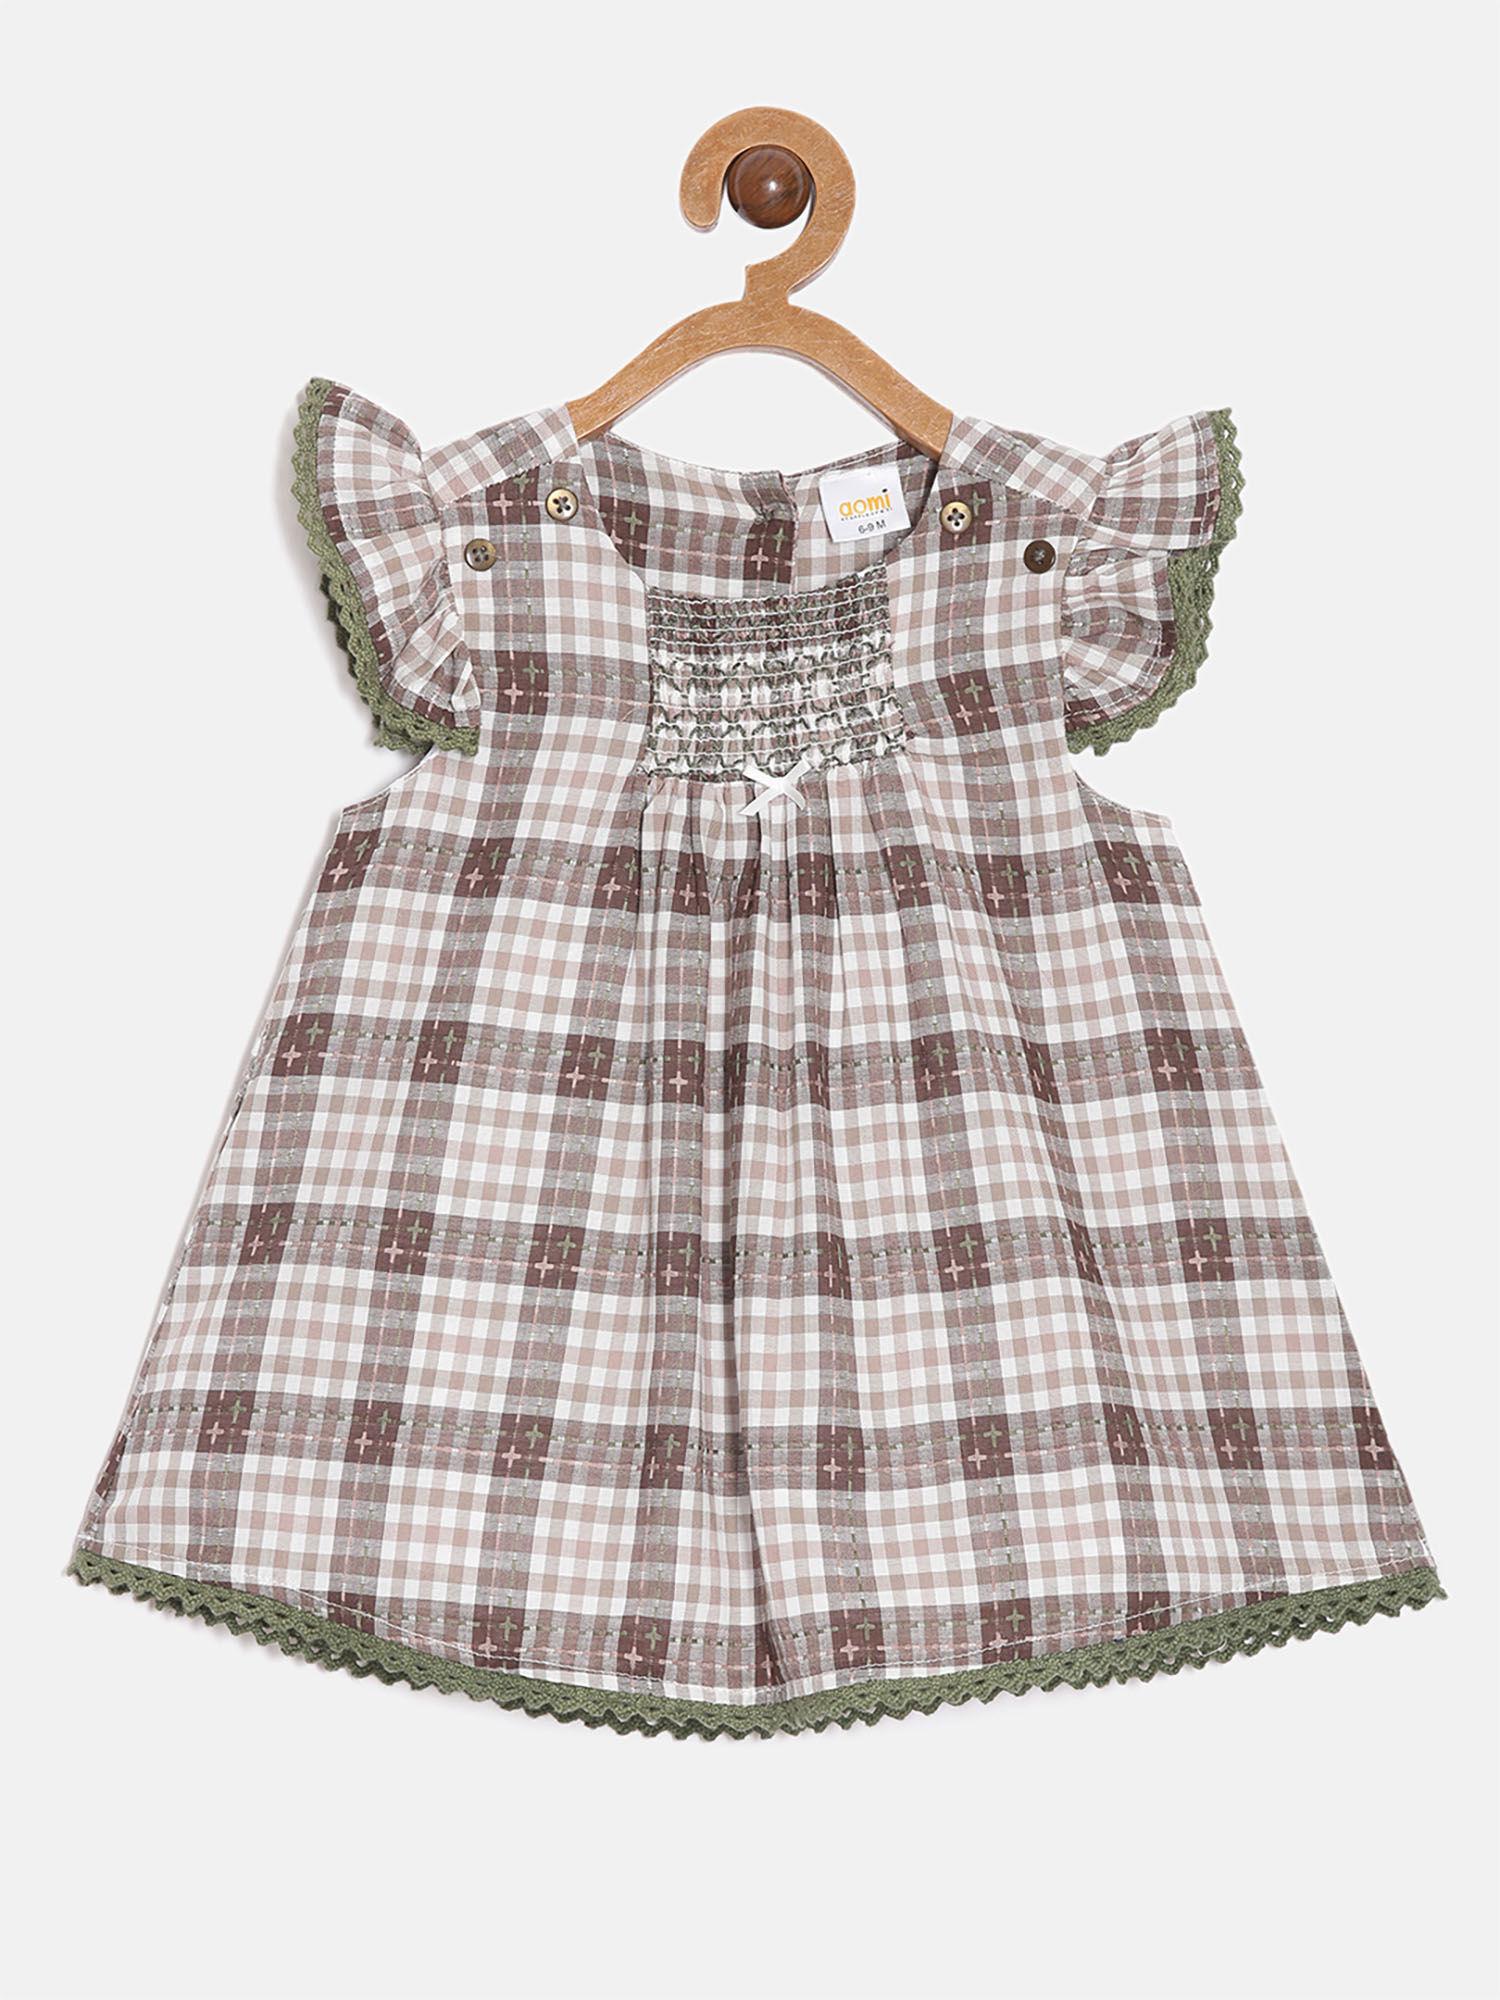 cotton infant smocked dress with cap sleeves and lace-brown & white